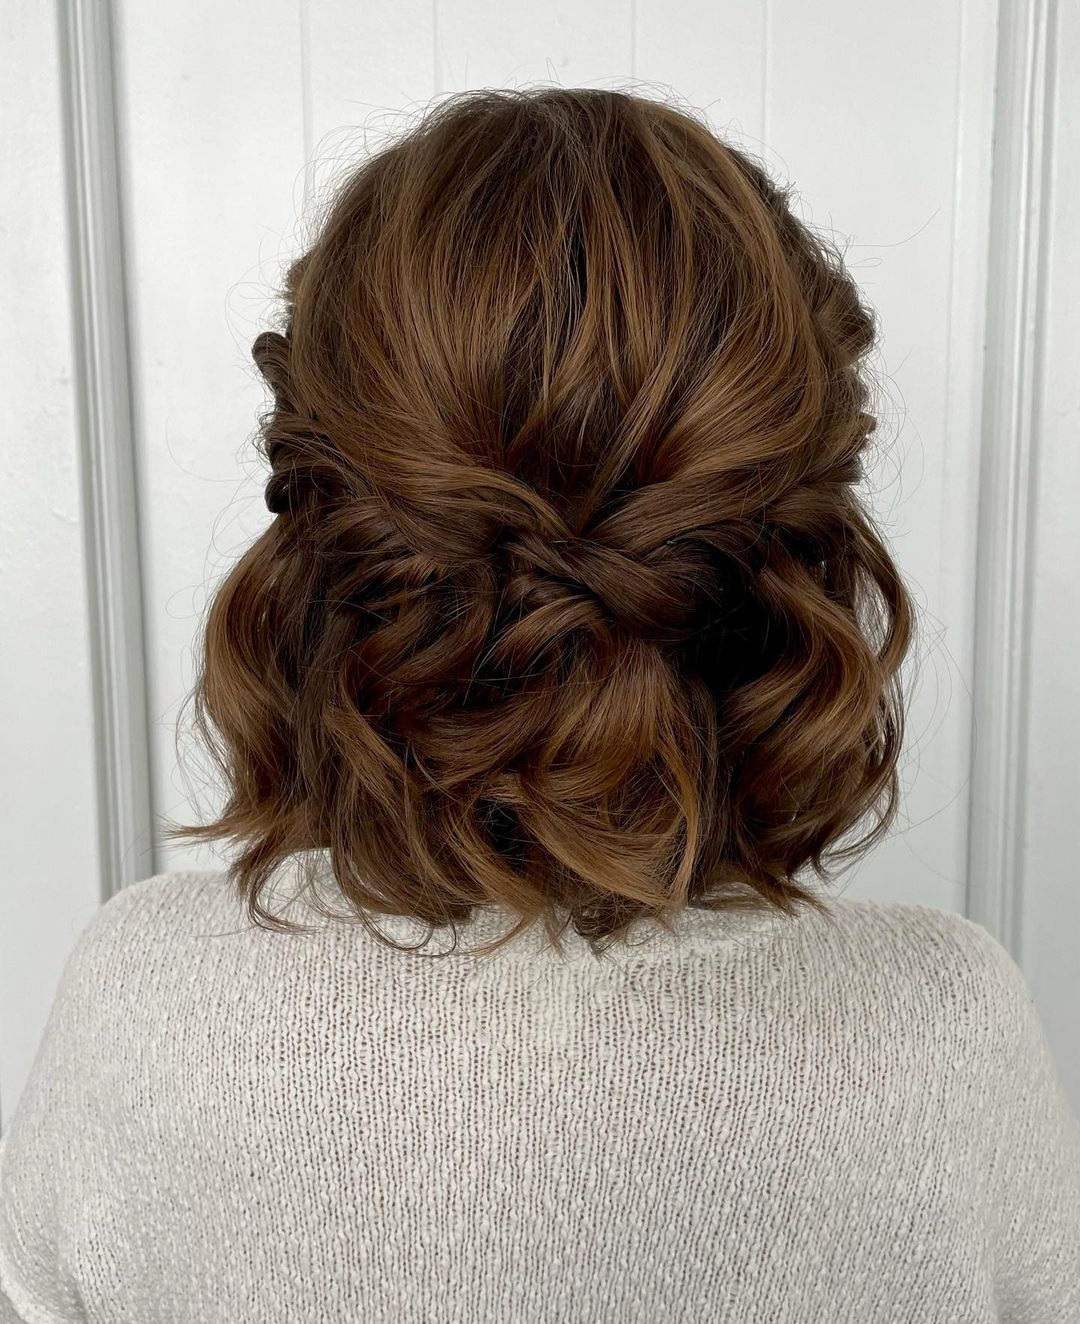 Hairstyles For Skirt | laque.vn